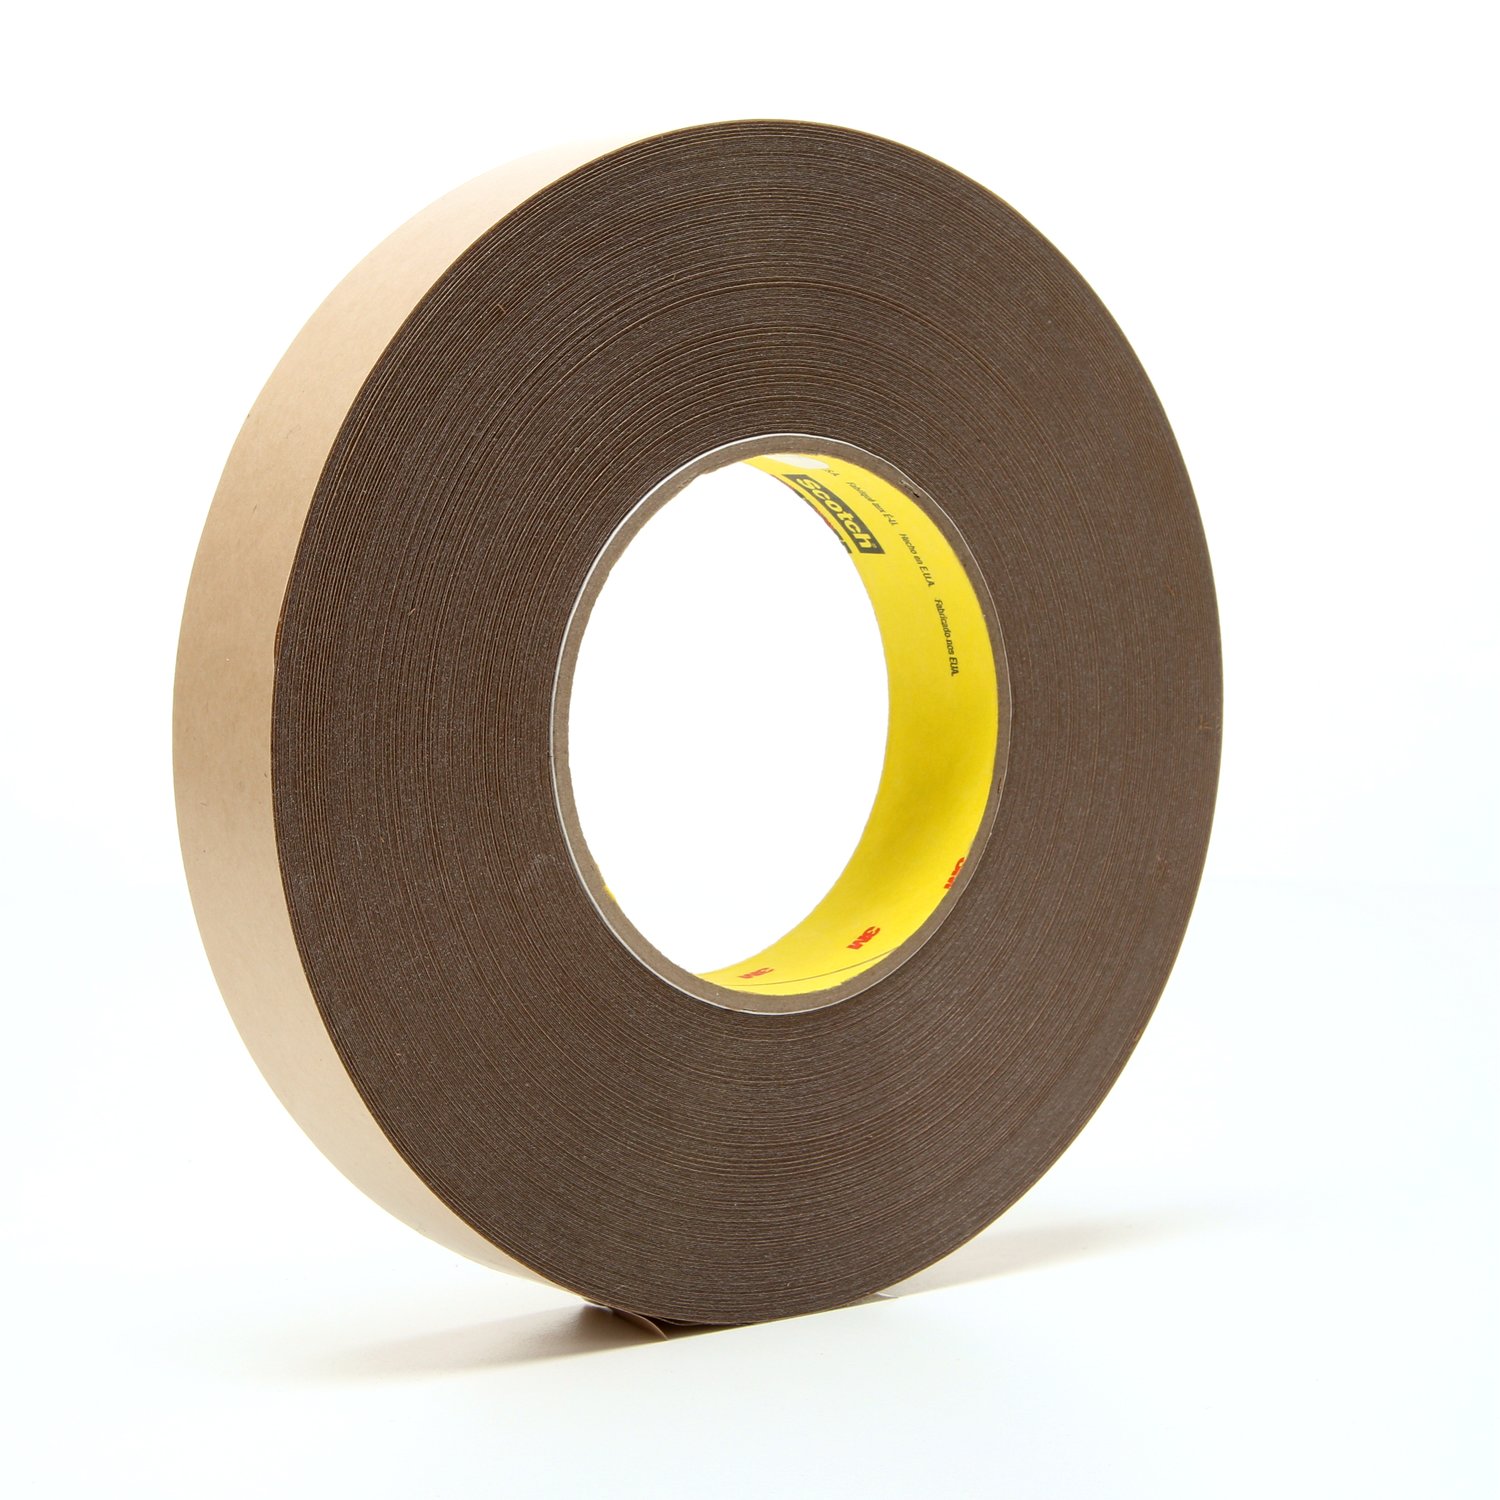 7000048526 - 3M Removable Repositionable Tape 9425, Clear, 1 in x 72 yd, 5.8 mil, 9
rolls per case